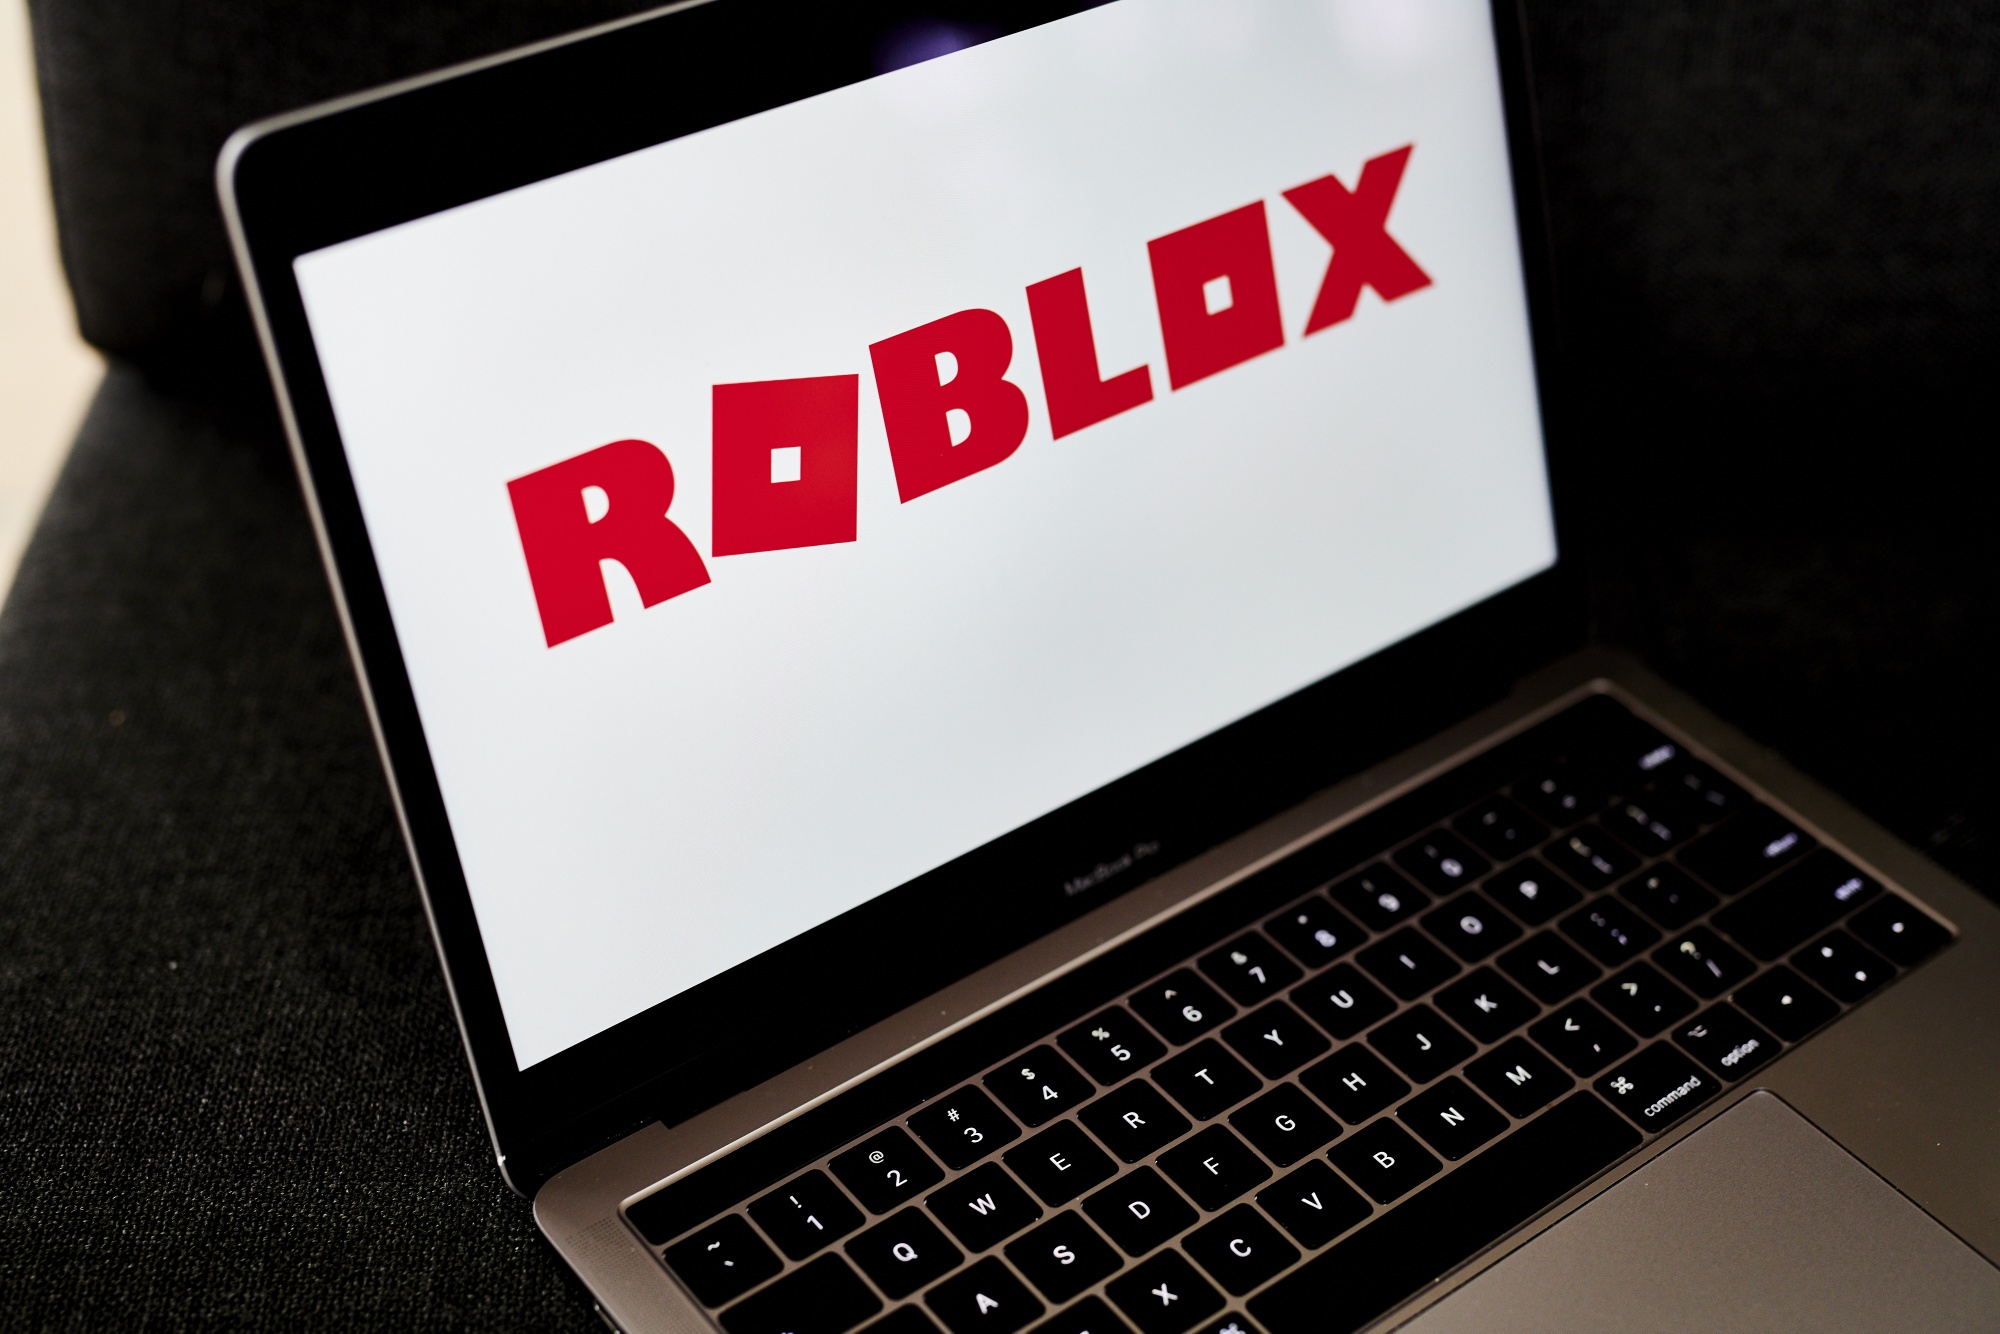 Roblox Is Accused in a Lawsuit of Ripping Kids Off by Deleting in-Game  Content Without Giving Refunds